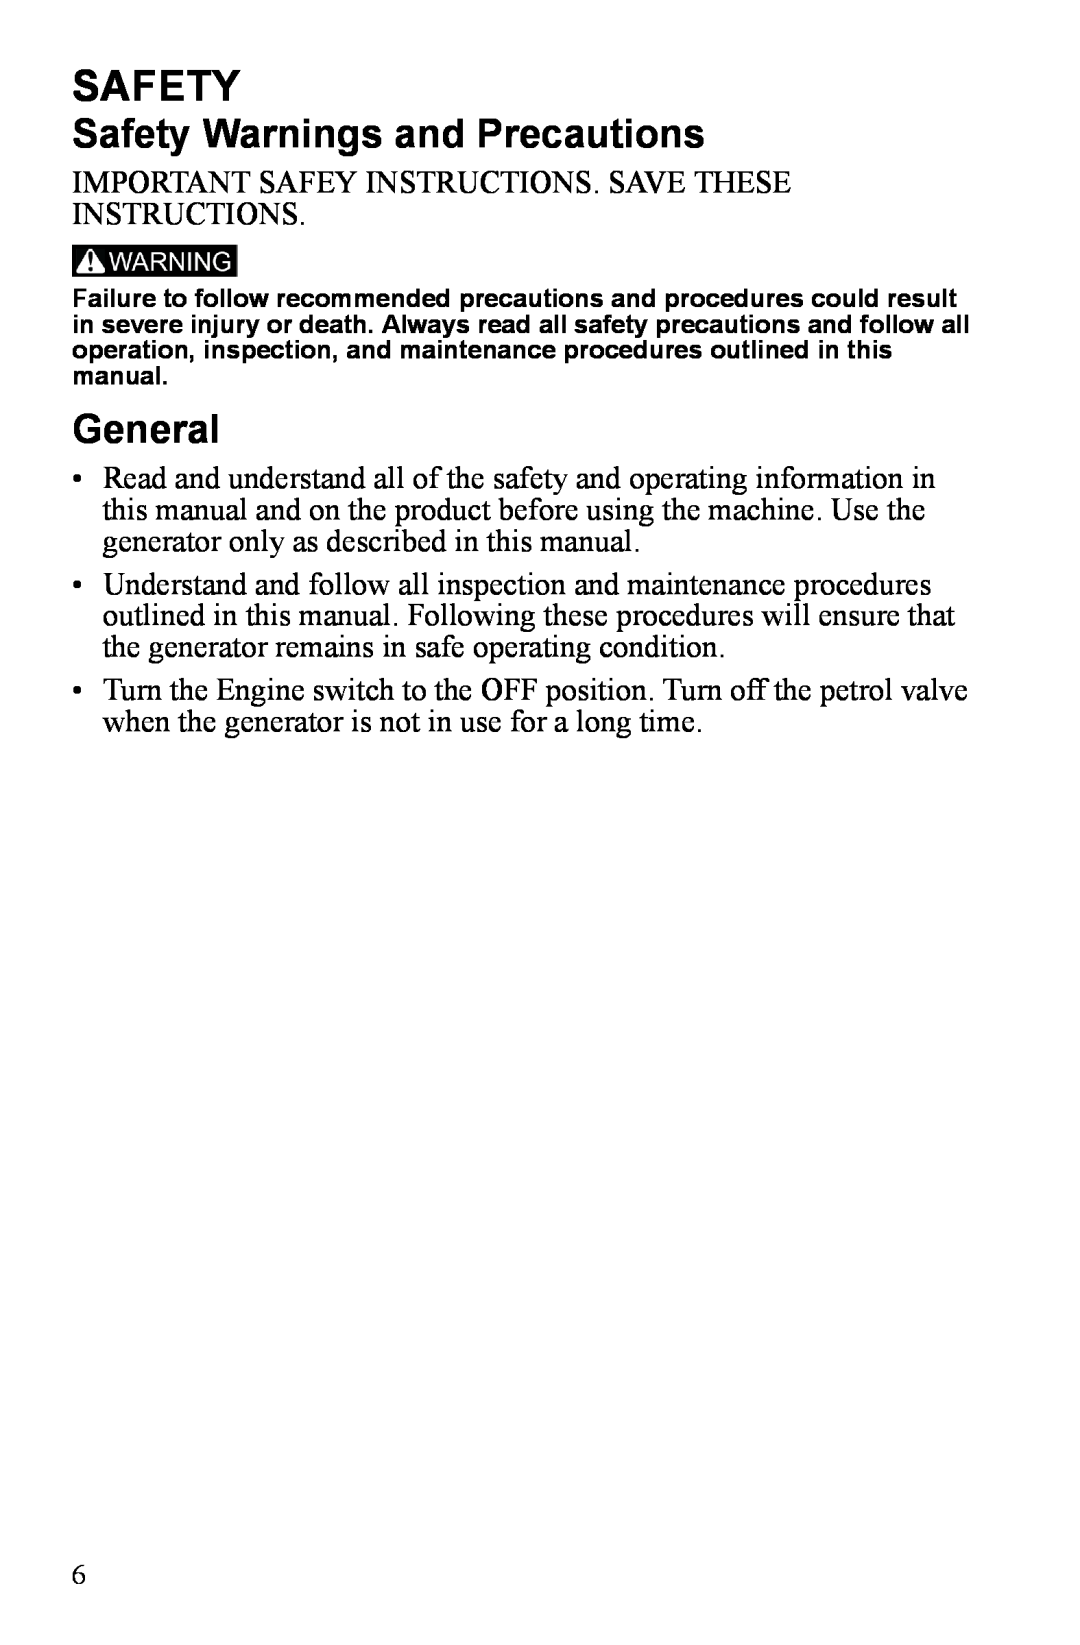 Polaris P3000iE manual Safety Warnings and Precautions, General 